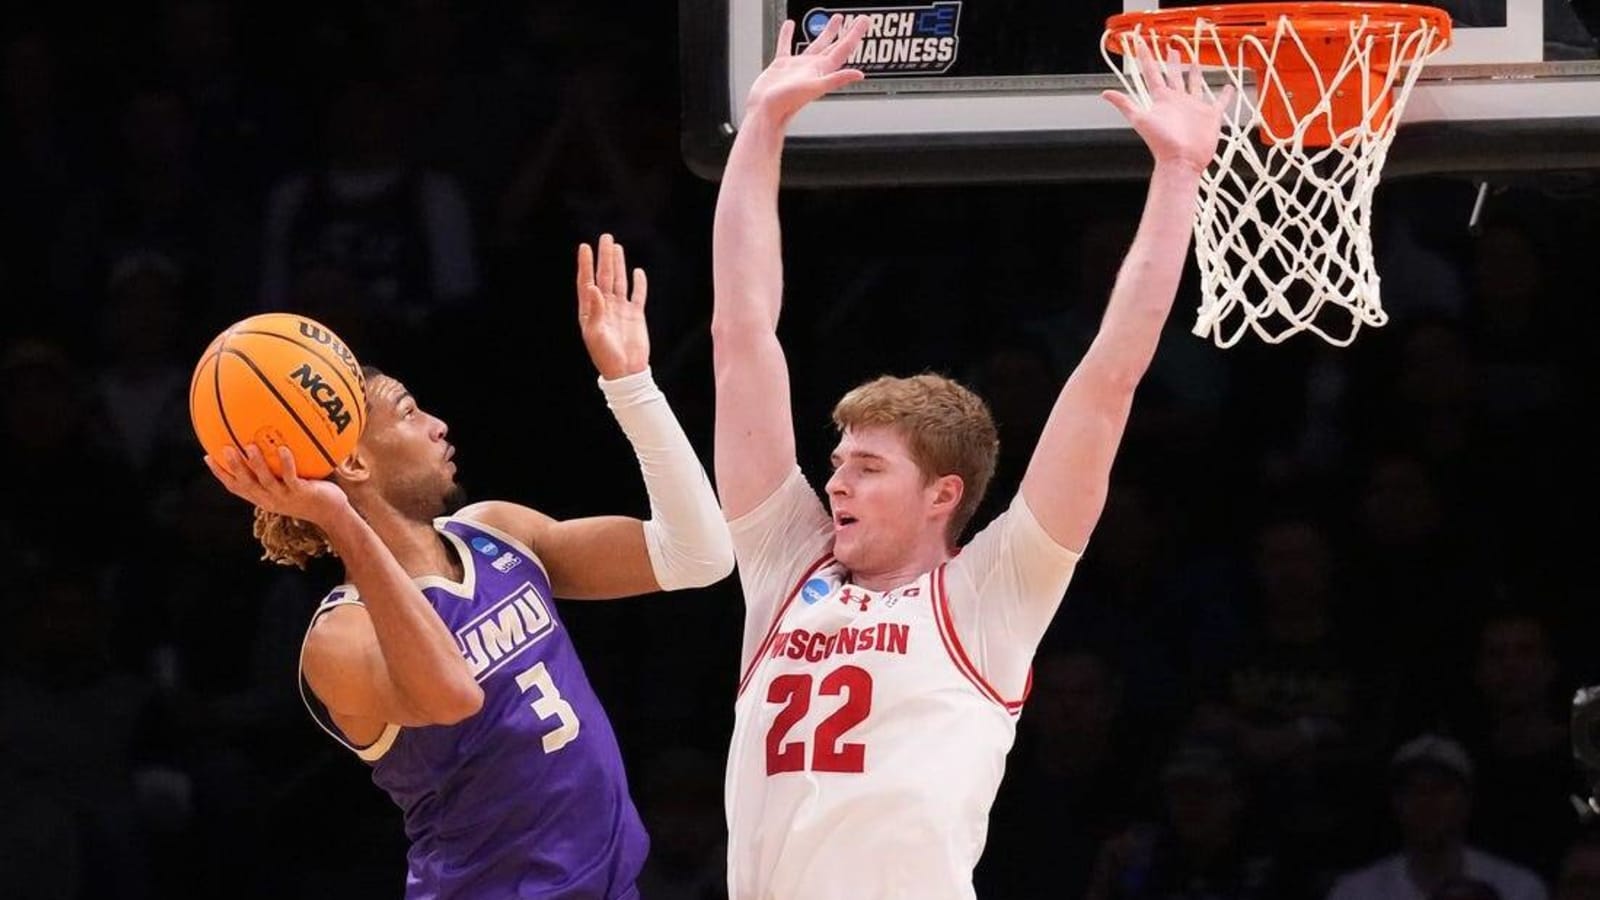 James Madison leads wire to wire in beating Wisconsin